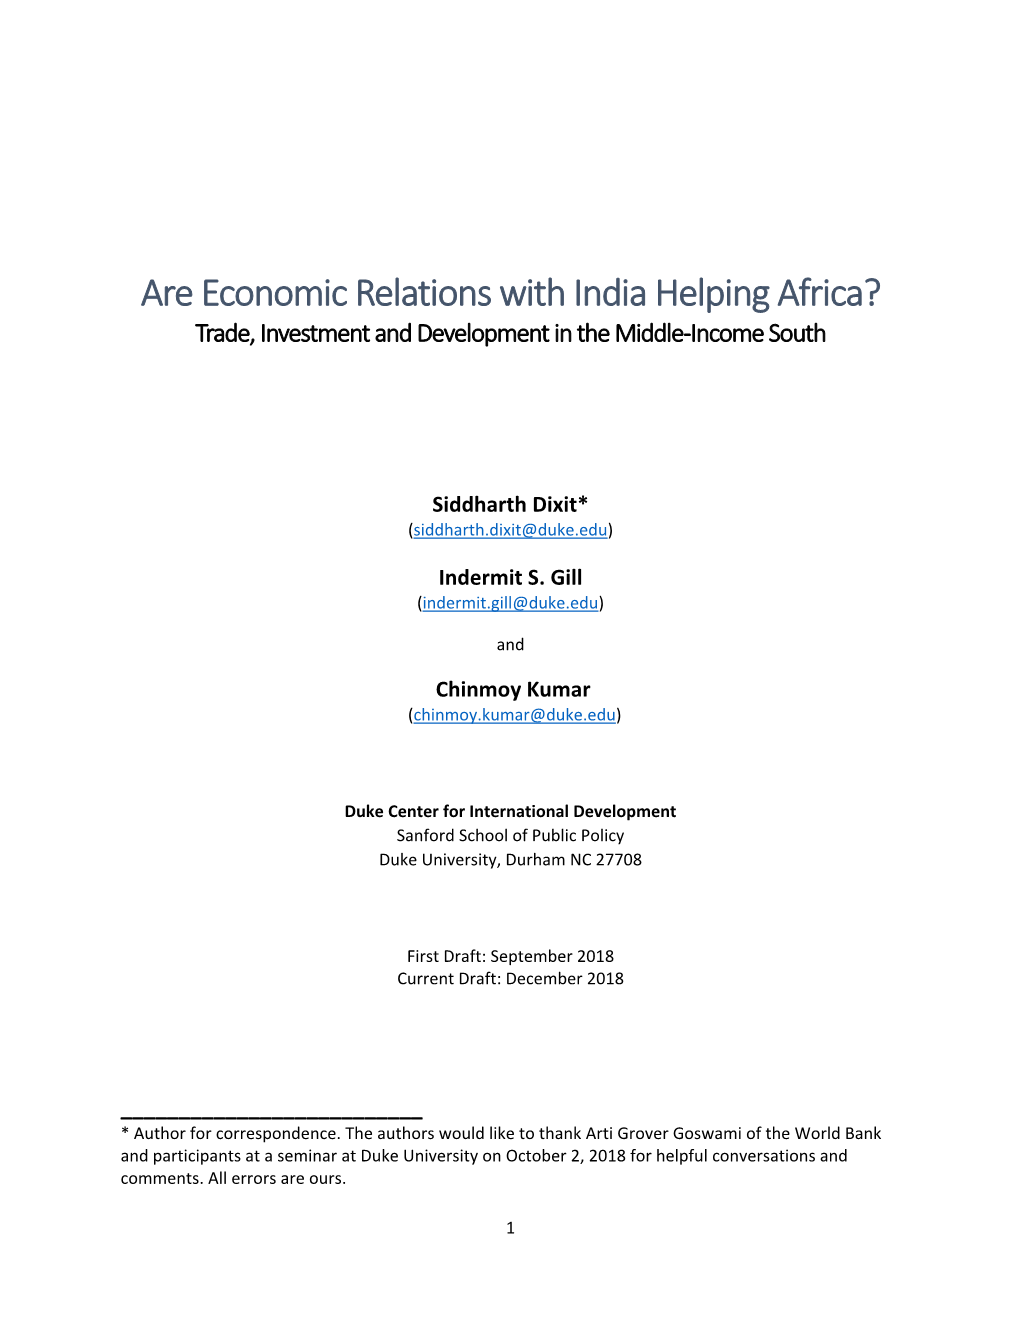 Are Economic Relations with India Helping Africa? Trade, Investment and Development in the Middle-Income South